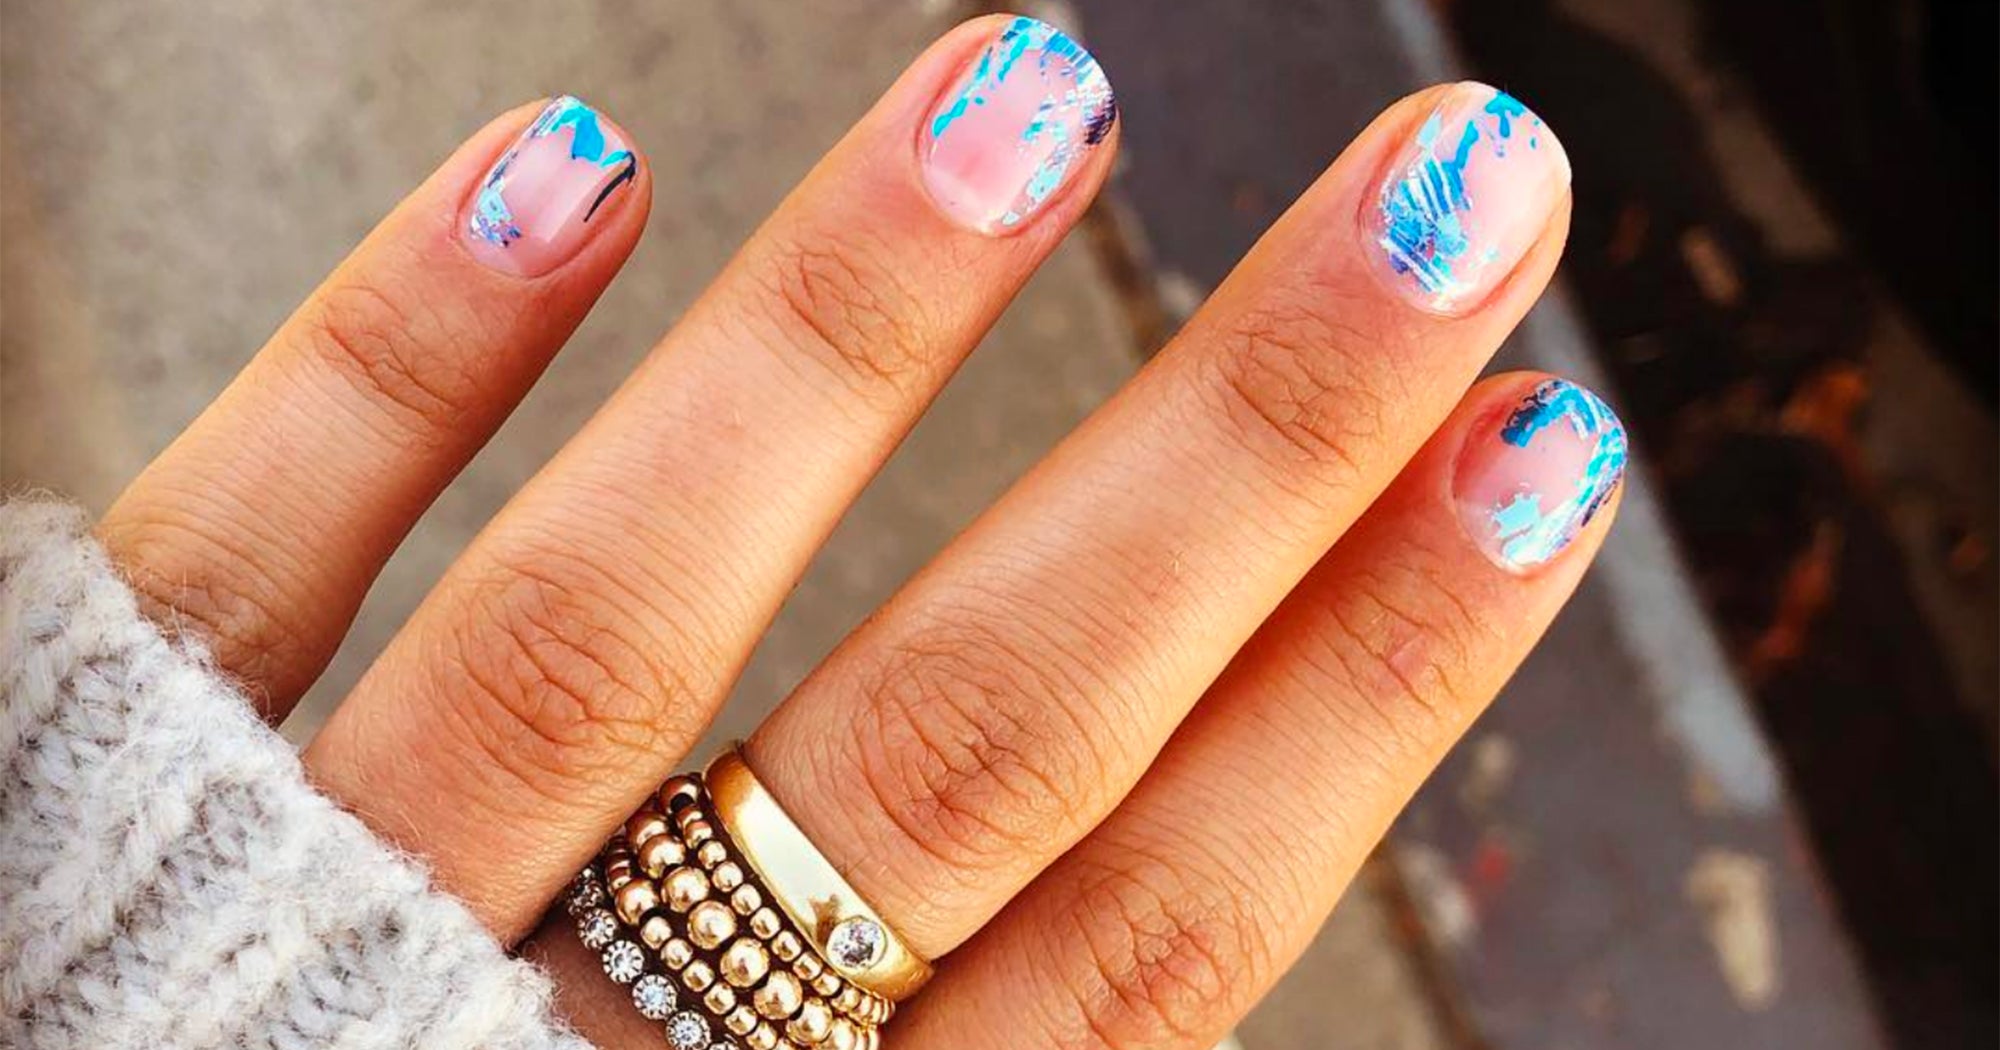 Short Nail Art Designs & Ideas For Your Next Manicure